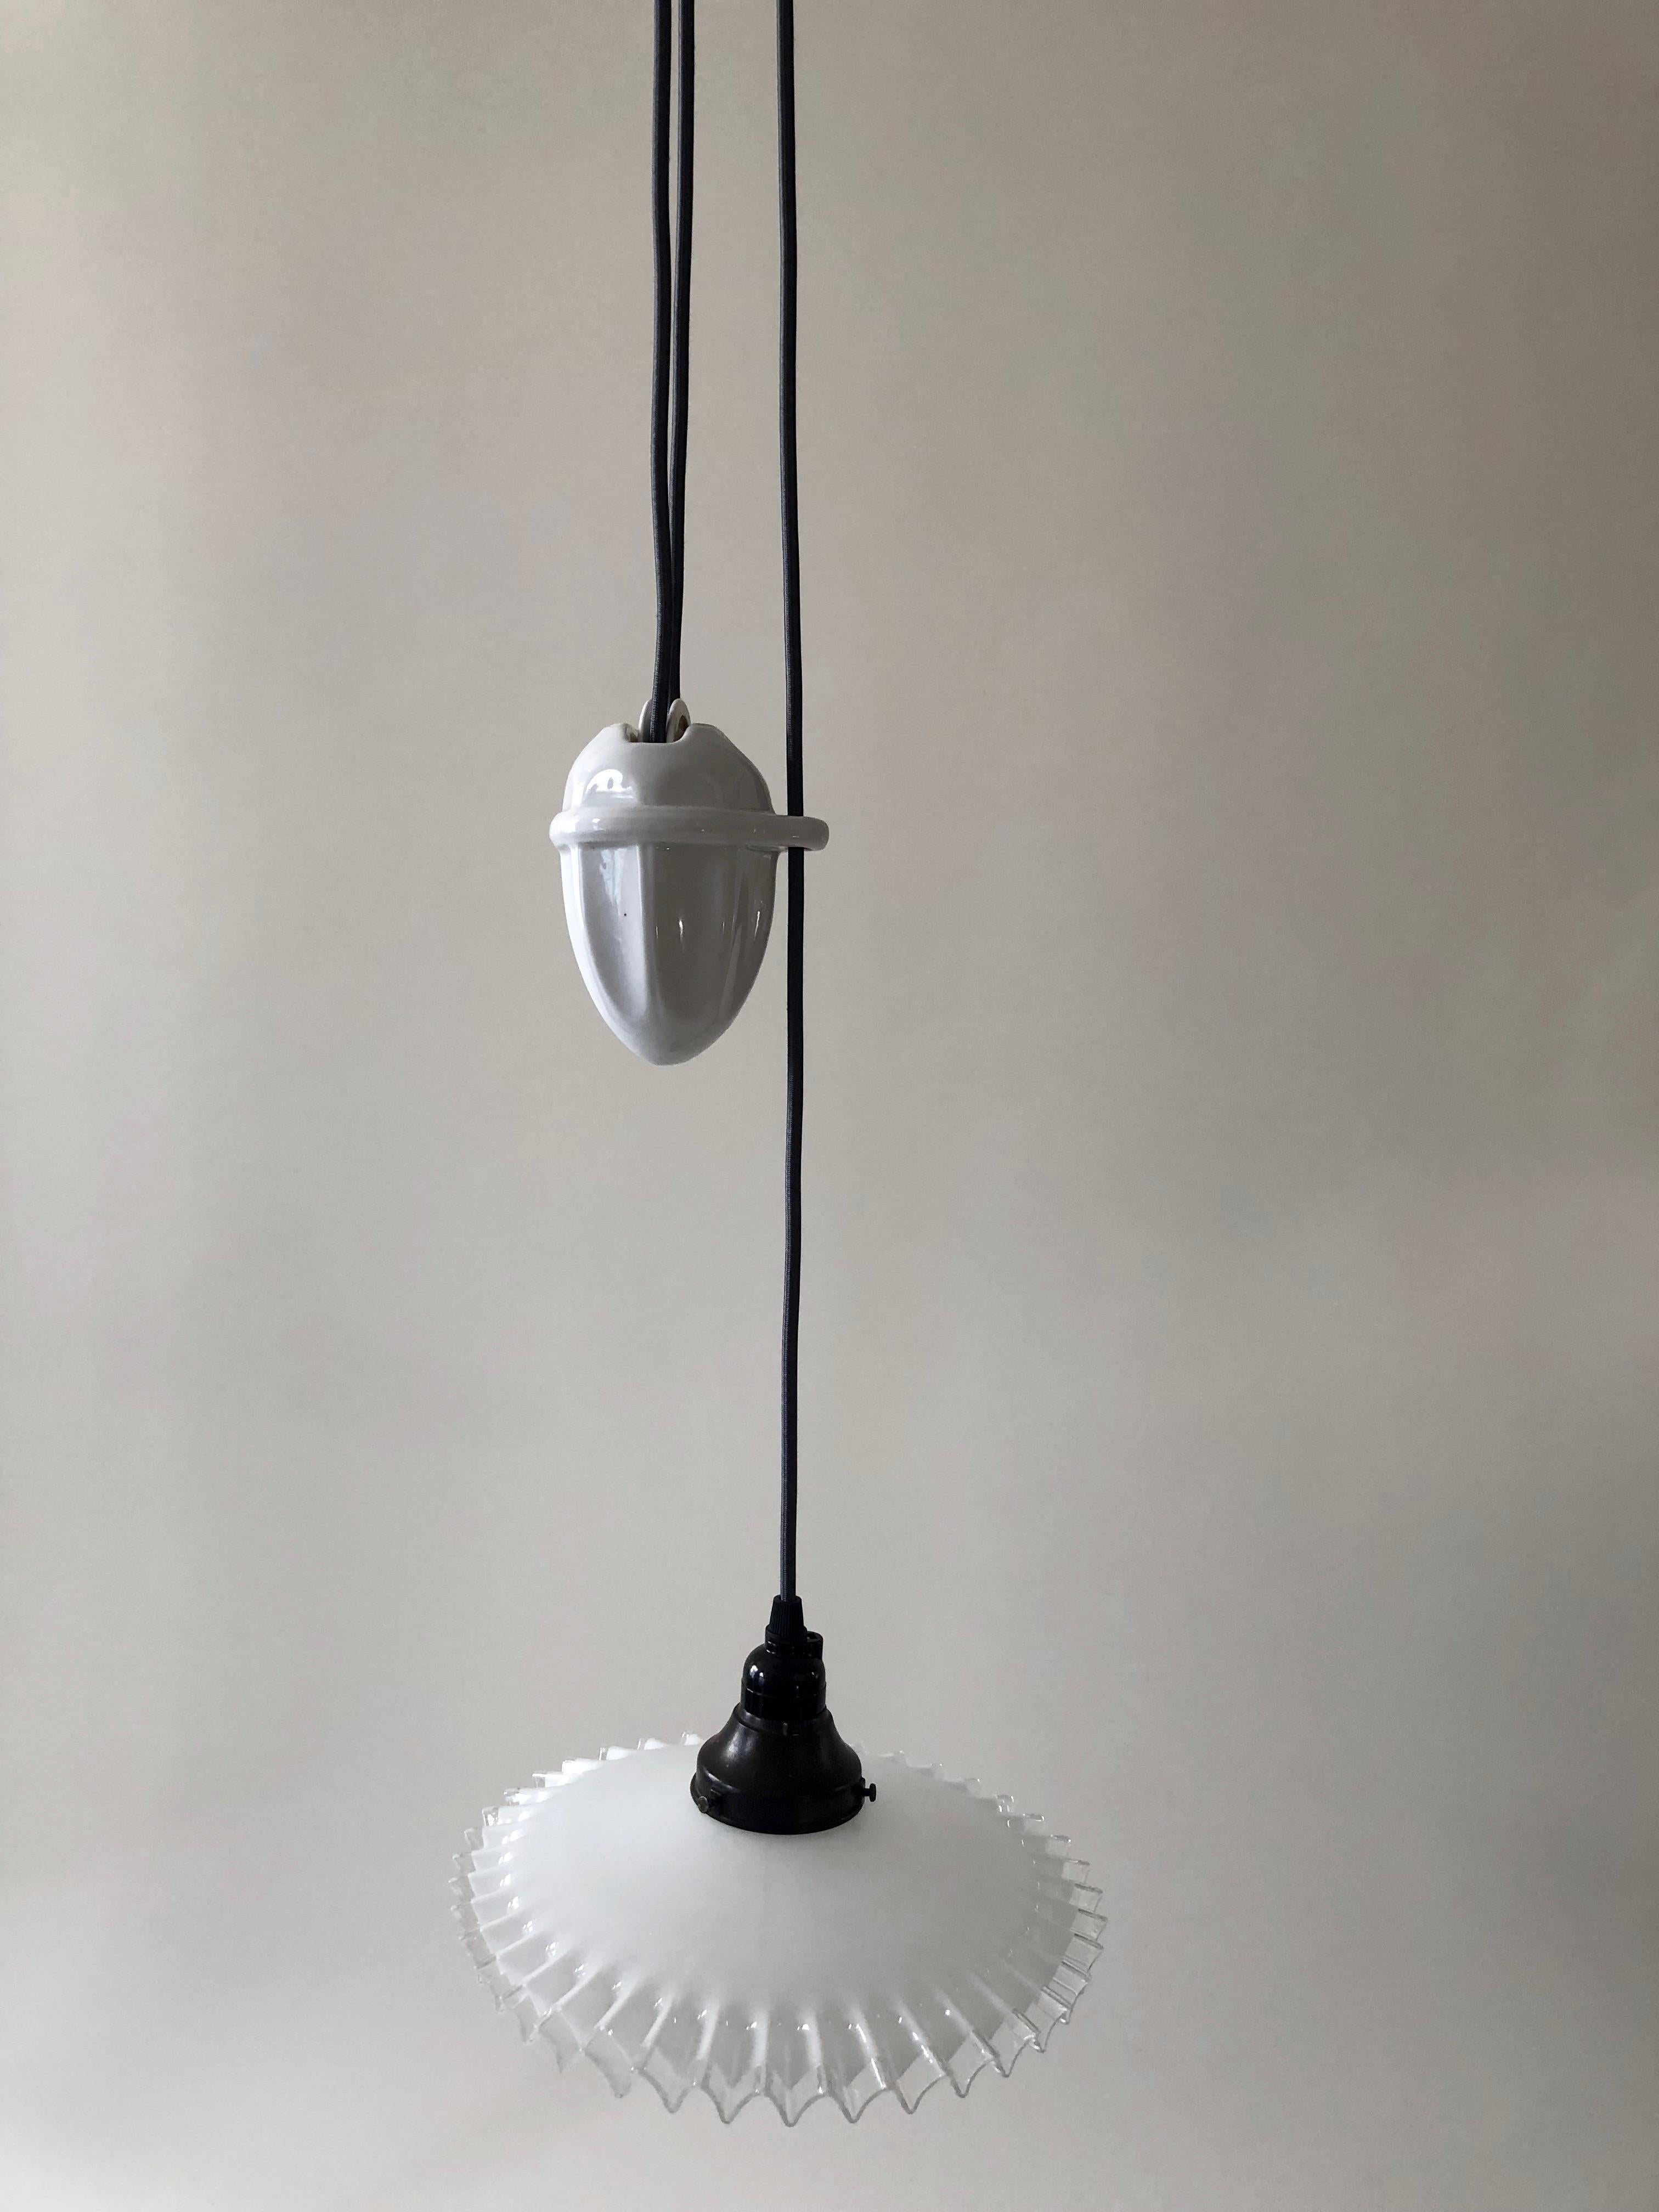 A beautiful counterweight pendant lamp from circa 1900. Originating in Austria, in the K and K Monarchy, it has a patent dating
from the industrial revolution. The lamp is made up of two pieces of porcelain, the upper piece attaches to the ceiling